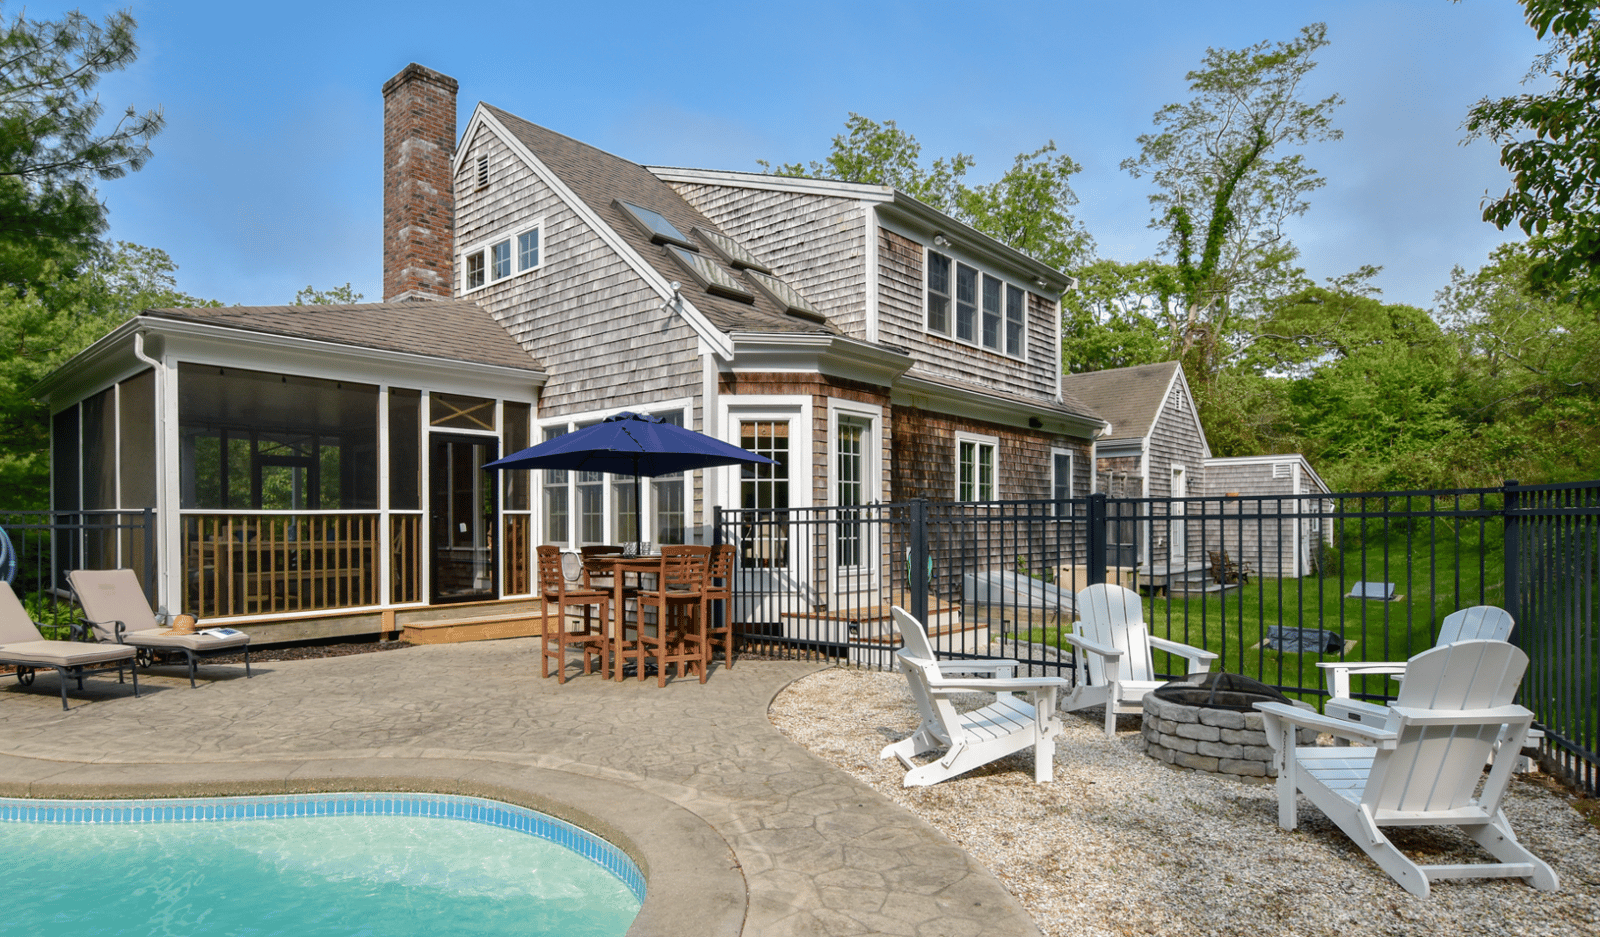 Vacation rental home with pool in Chatham